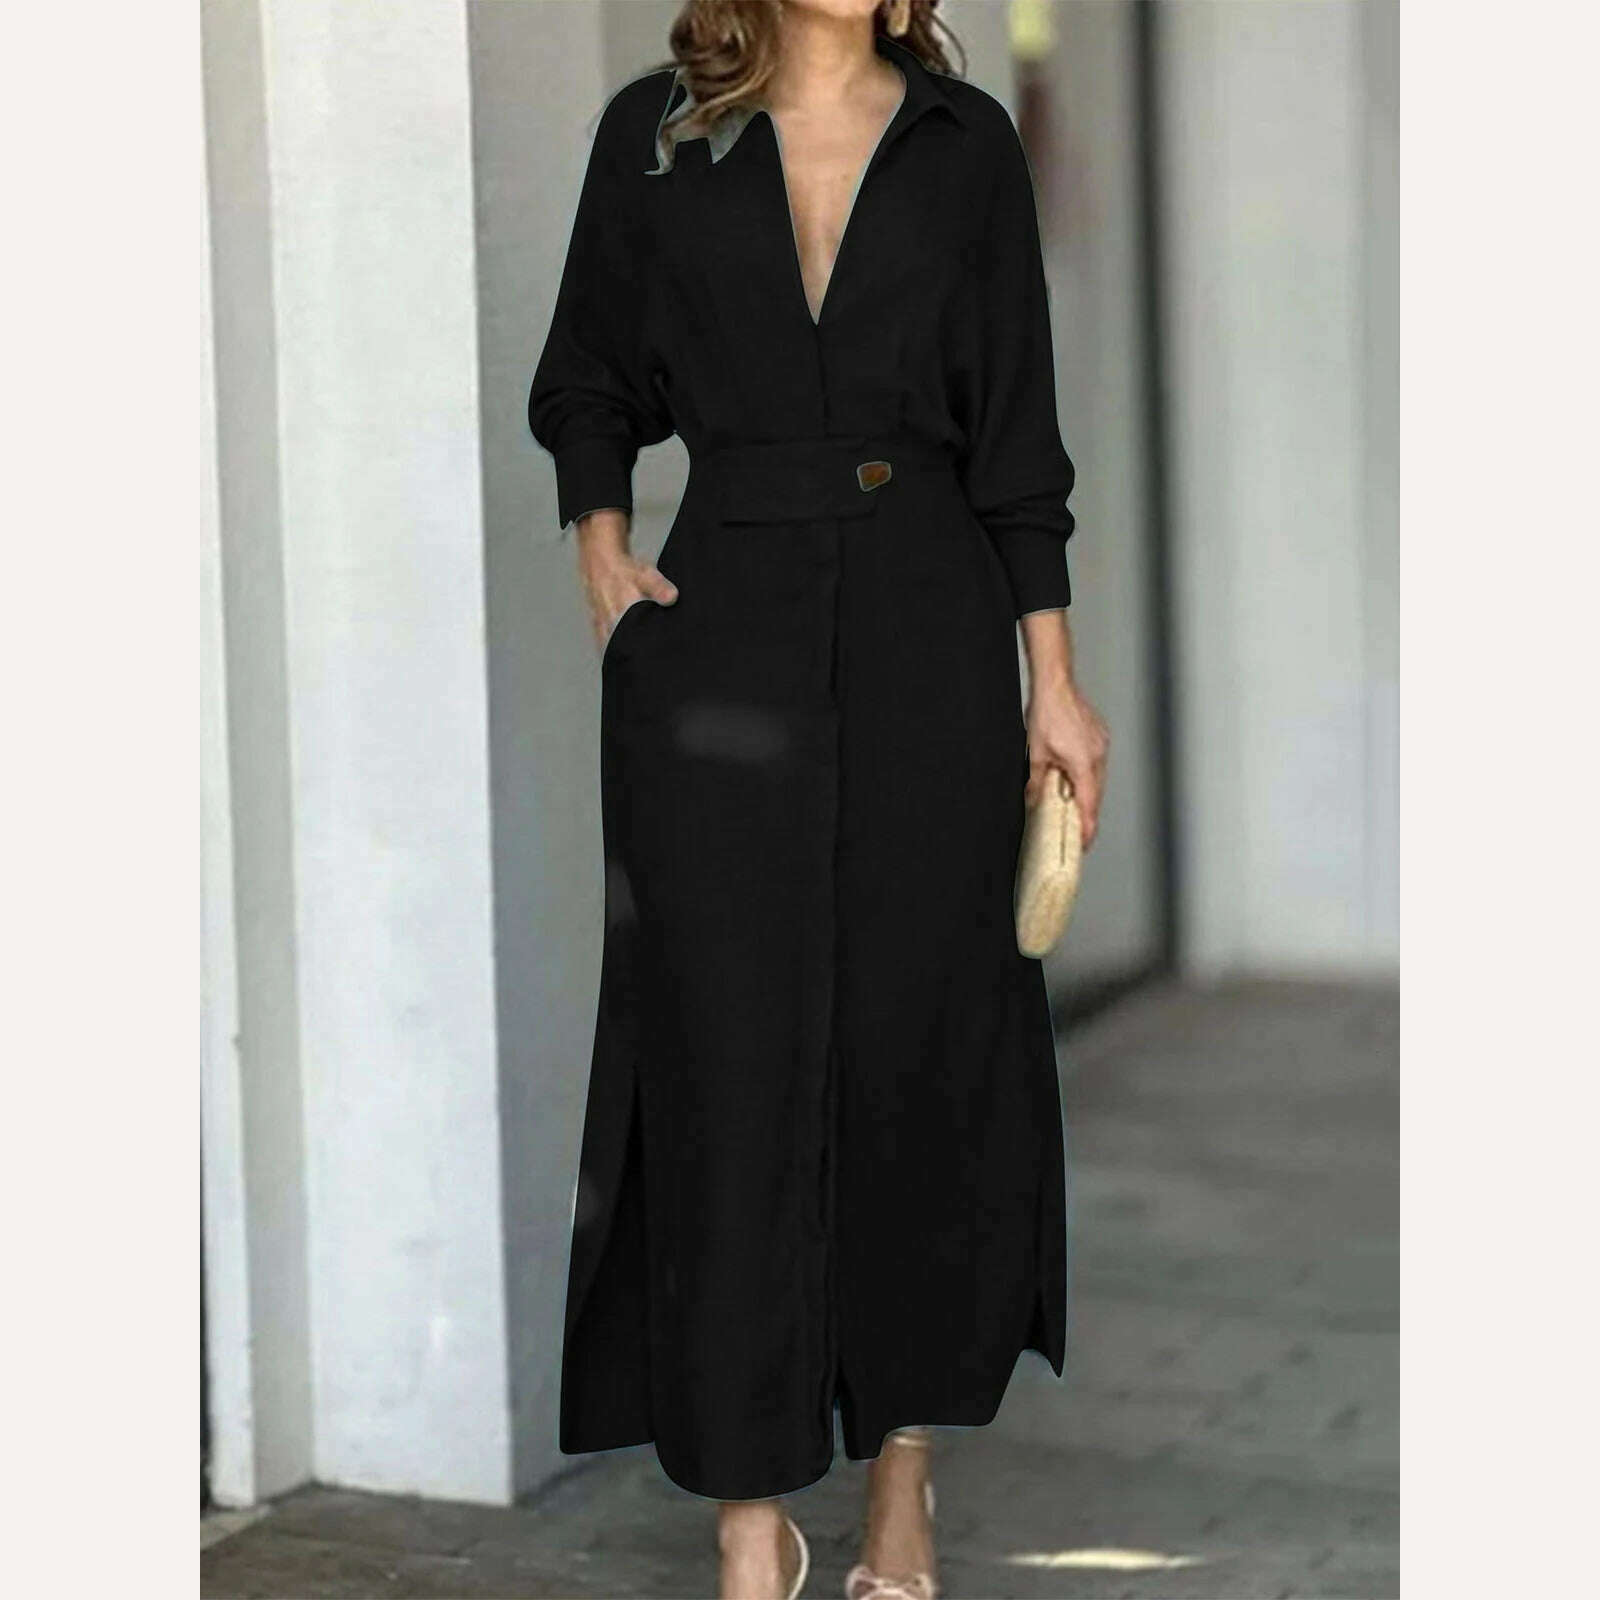 KIMLUD, Yeezzi Office Lady Fashion Long Sleeve Solid Color V-Neck A-Line Dress 2023 Spring Autumn Casual Going Out Vacation Maxi Dresses, BLACK / S, KIMLUD Womens Clothes